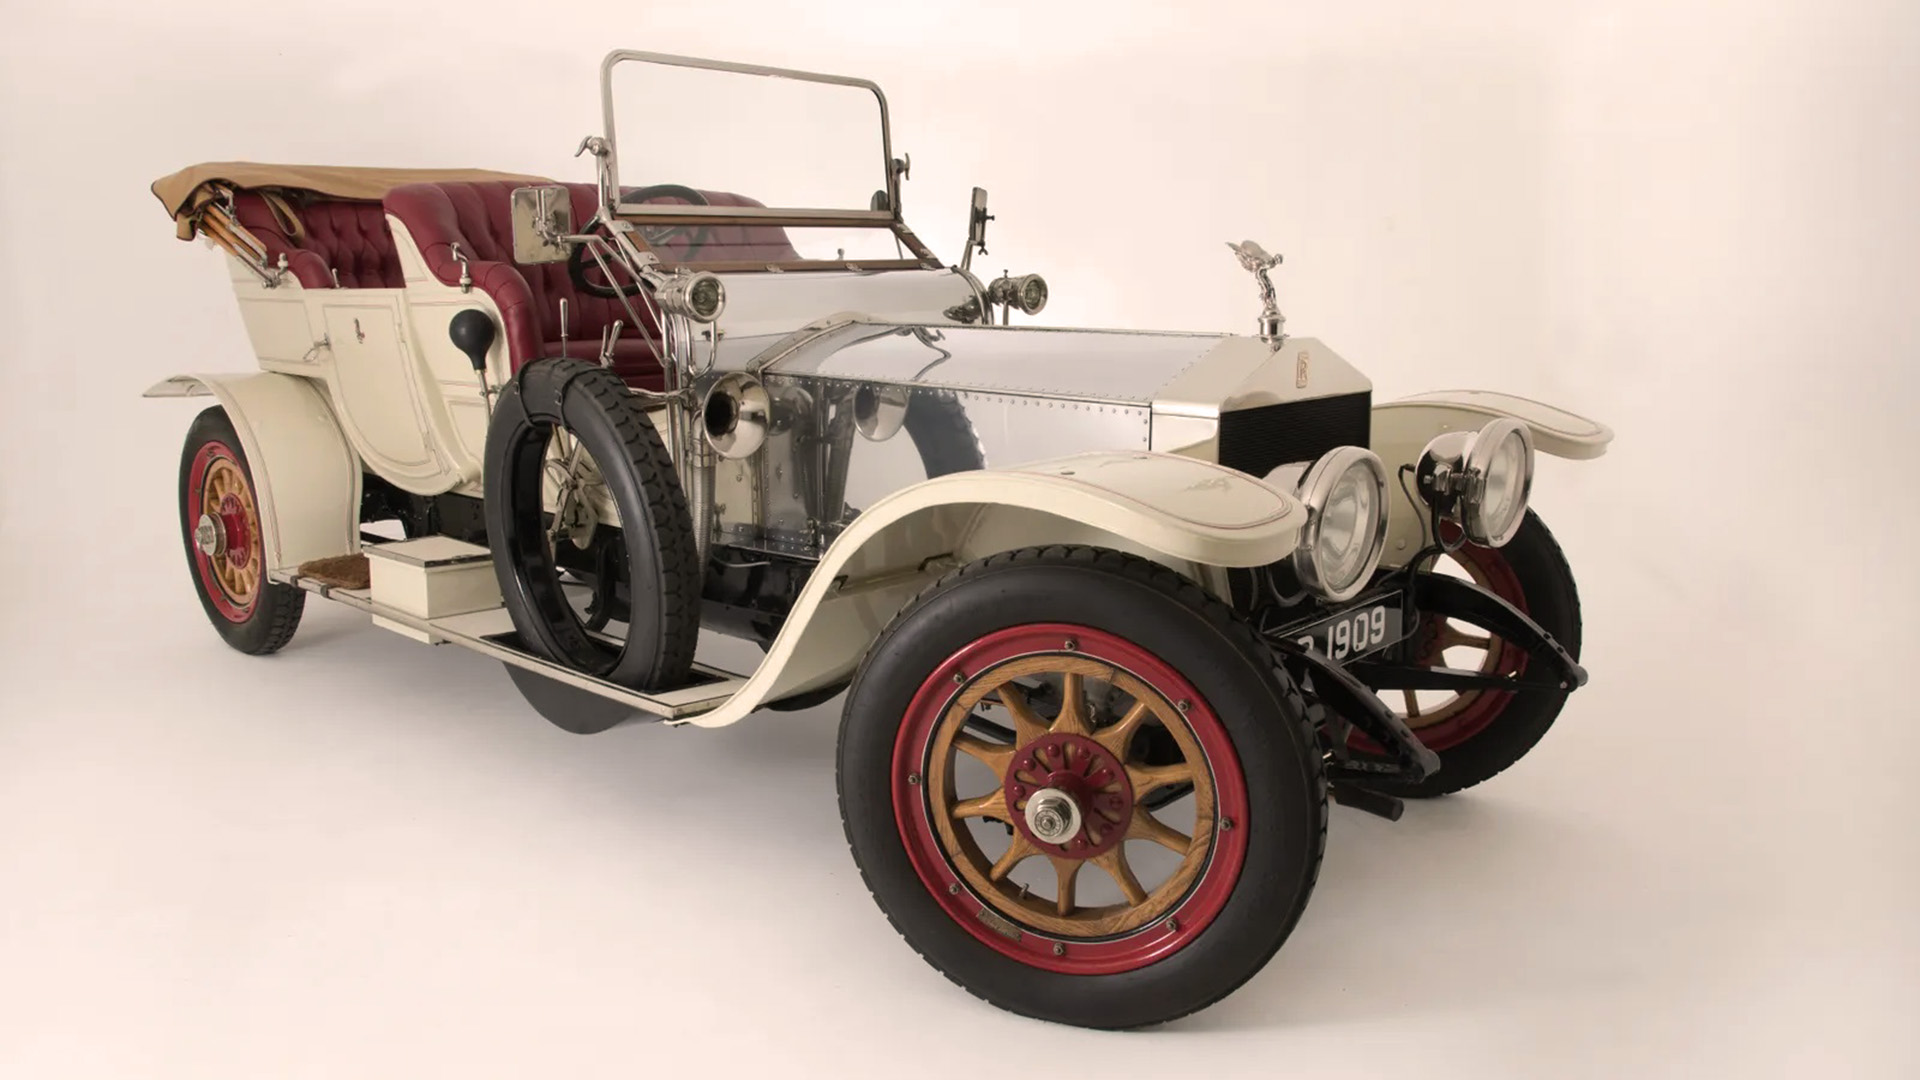 1924 Rolls-Royce Silver Ghost, the oldest car in the British royal house